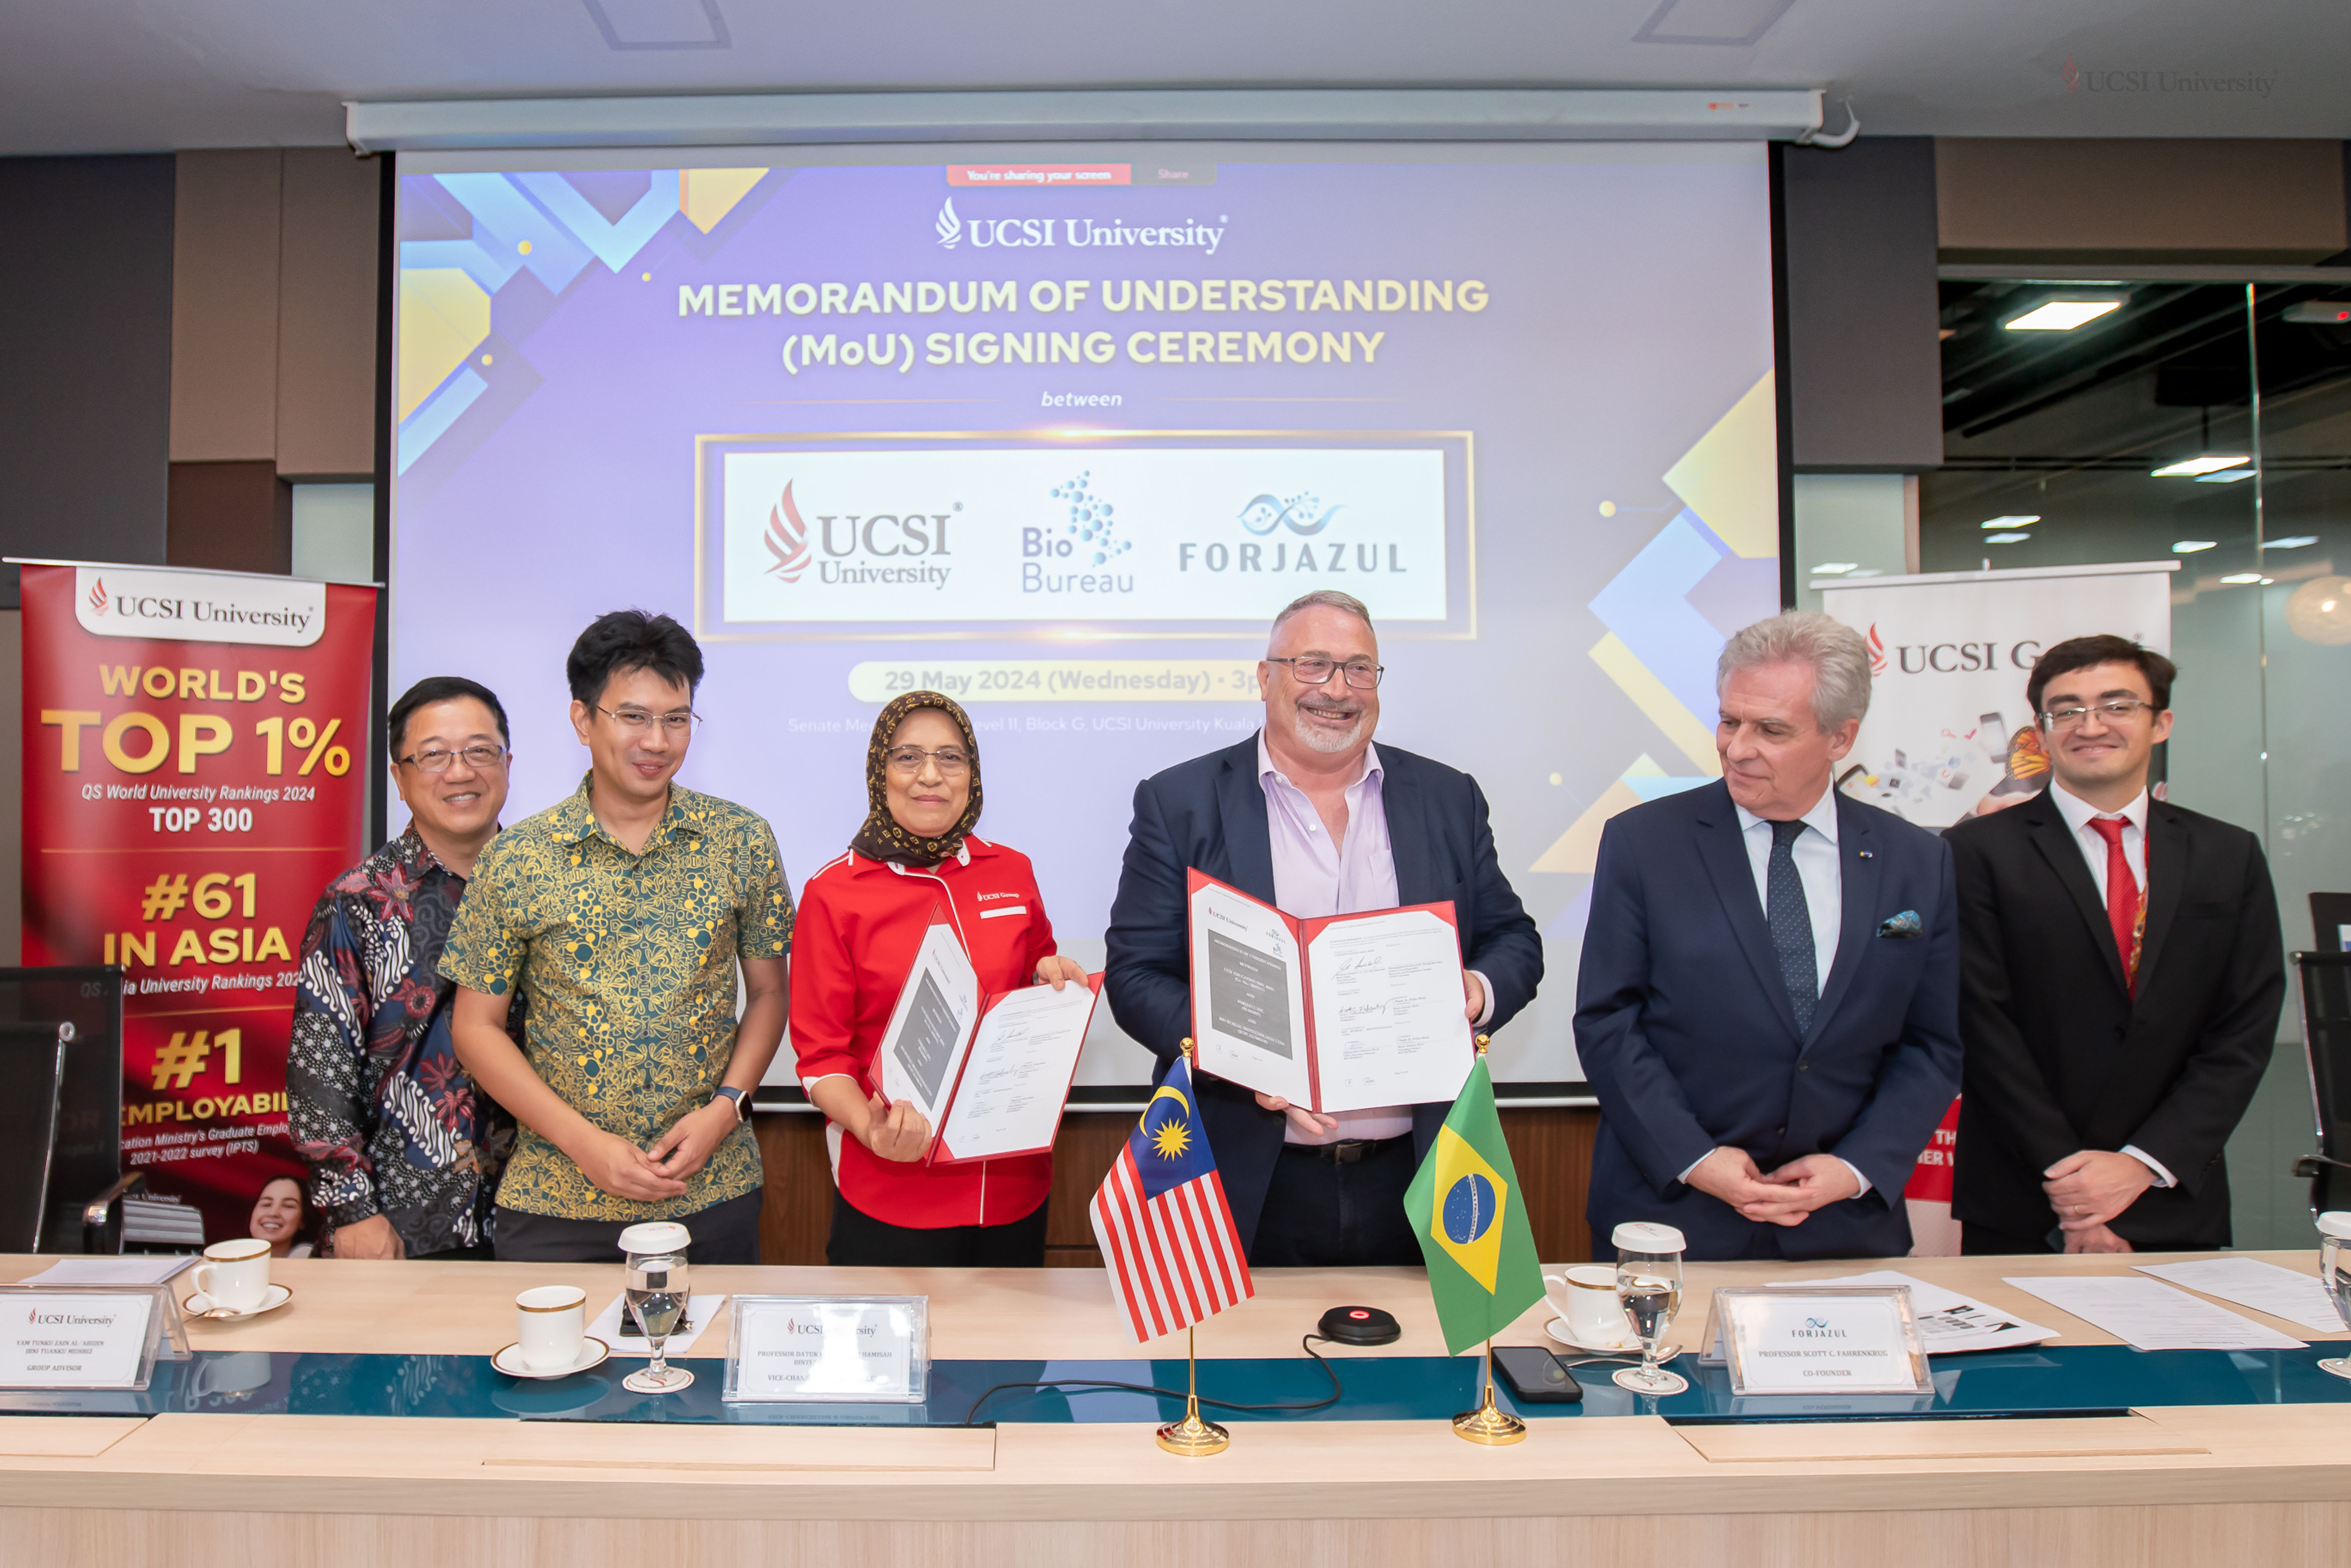 From left: UCSI Group executive chairman and founder Dato’ Peter Ng, UCSI Group advisor Yang Amat Mulia Tunku Zain Al-'Abidin Tuanku Muhriz, UCSI Group CEO and UCSI University vice-chancellor Prof Datuk Ir Ts Dr Siti Hamisah Binti Tapsir, Forjazul Inc co-founder Prof Scott Fahrenkrug, Ambassador of Brazil to Malaysia His Excellency Ary Quintella, and second secretary of the Embassy of Brazil in Malaysia Fabio Baptista, during the signing of the MoU.